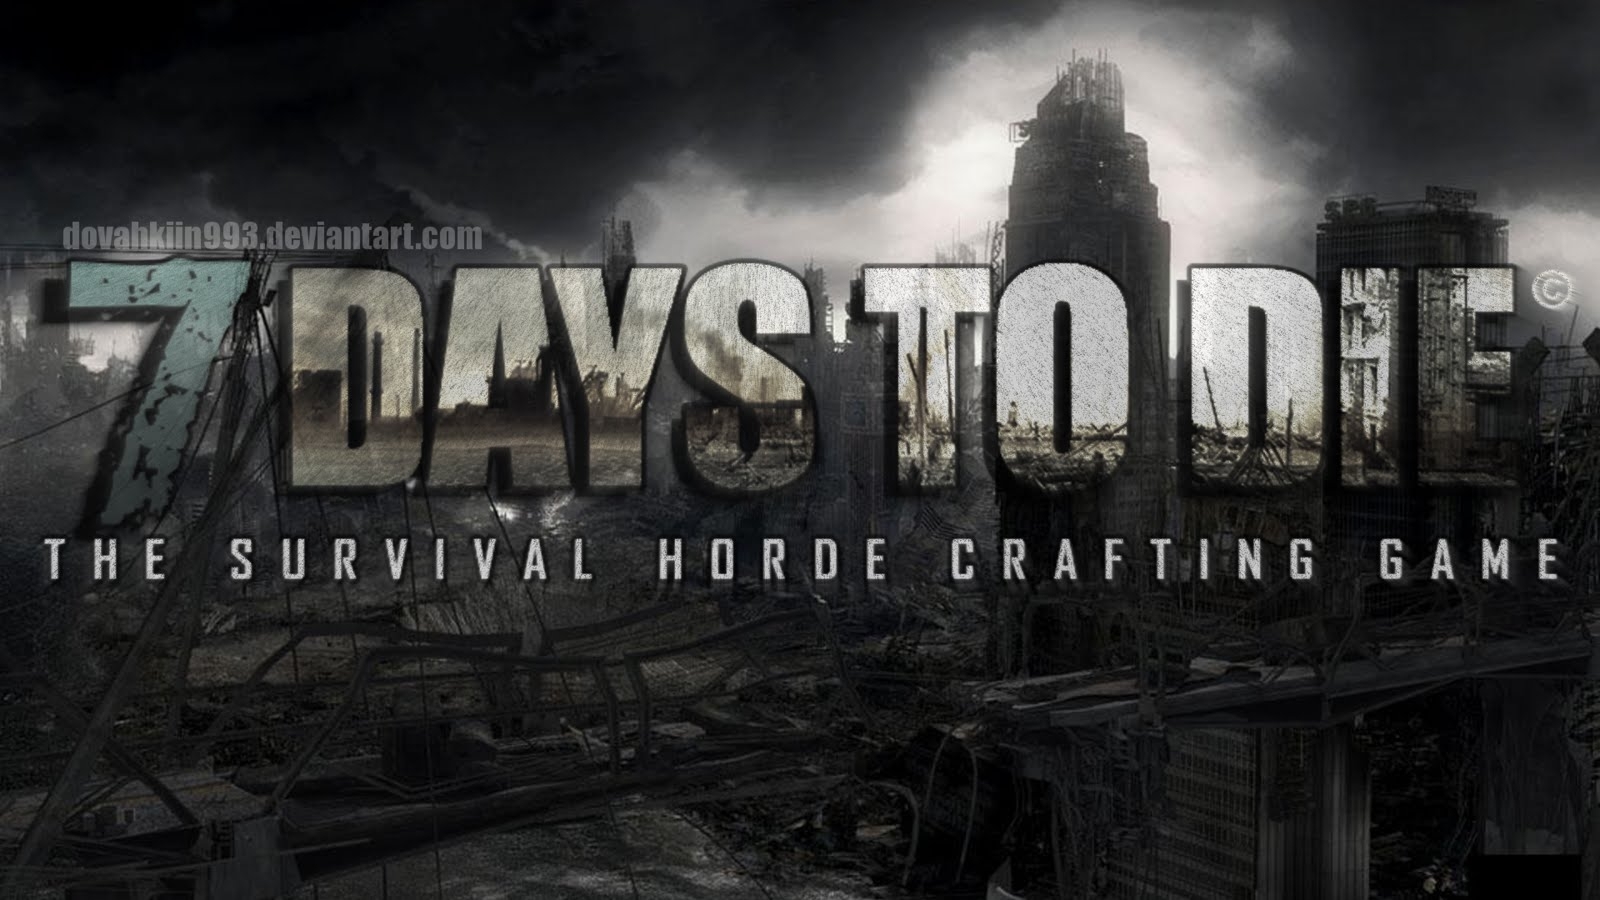 7 days to die pc download game